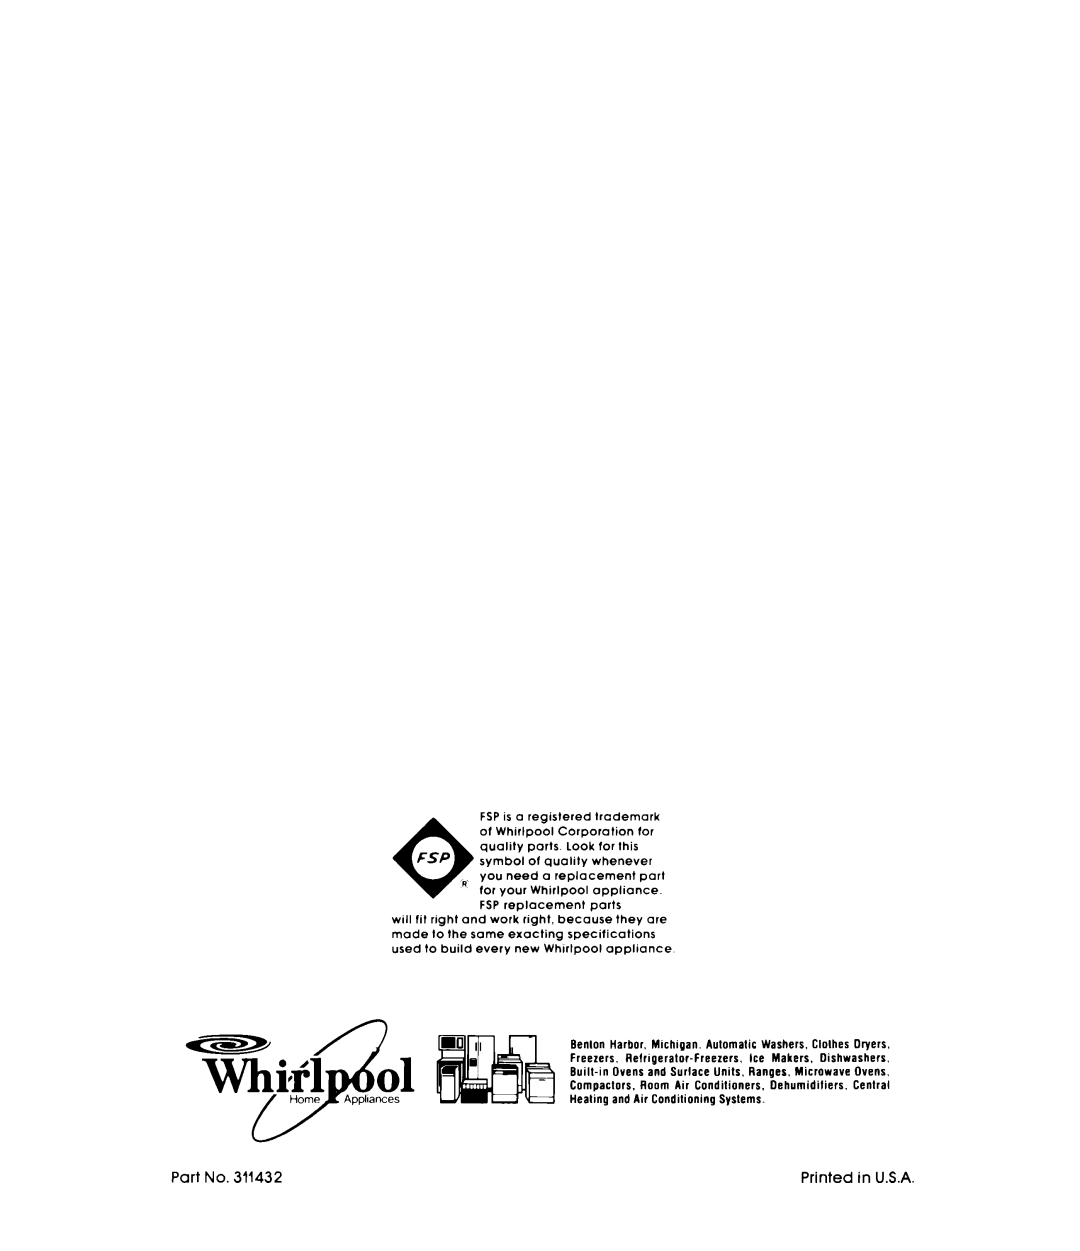 Whirlpool RM988PXL warranty Part No, Printed in U.S.A 